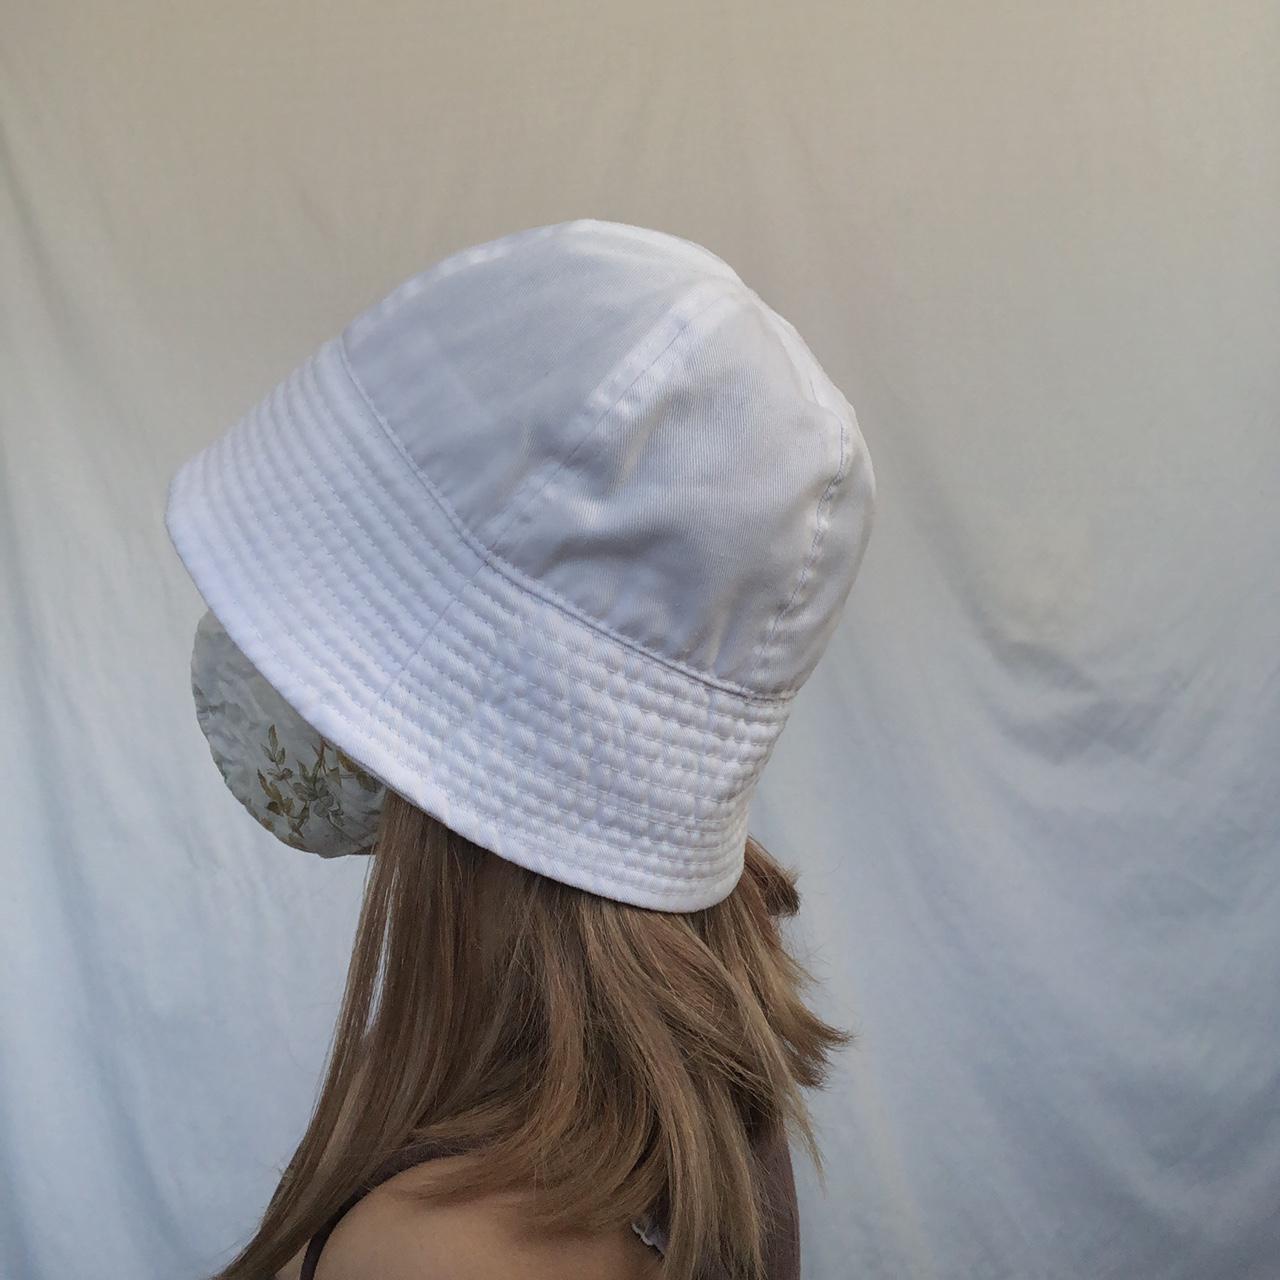 Product Image 1 - White bucket hat
+$4.05 ship 

Unbranded